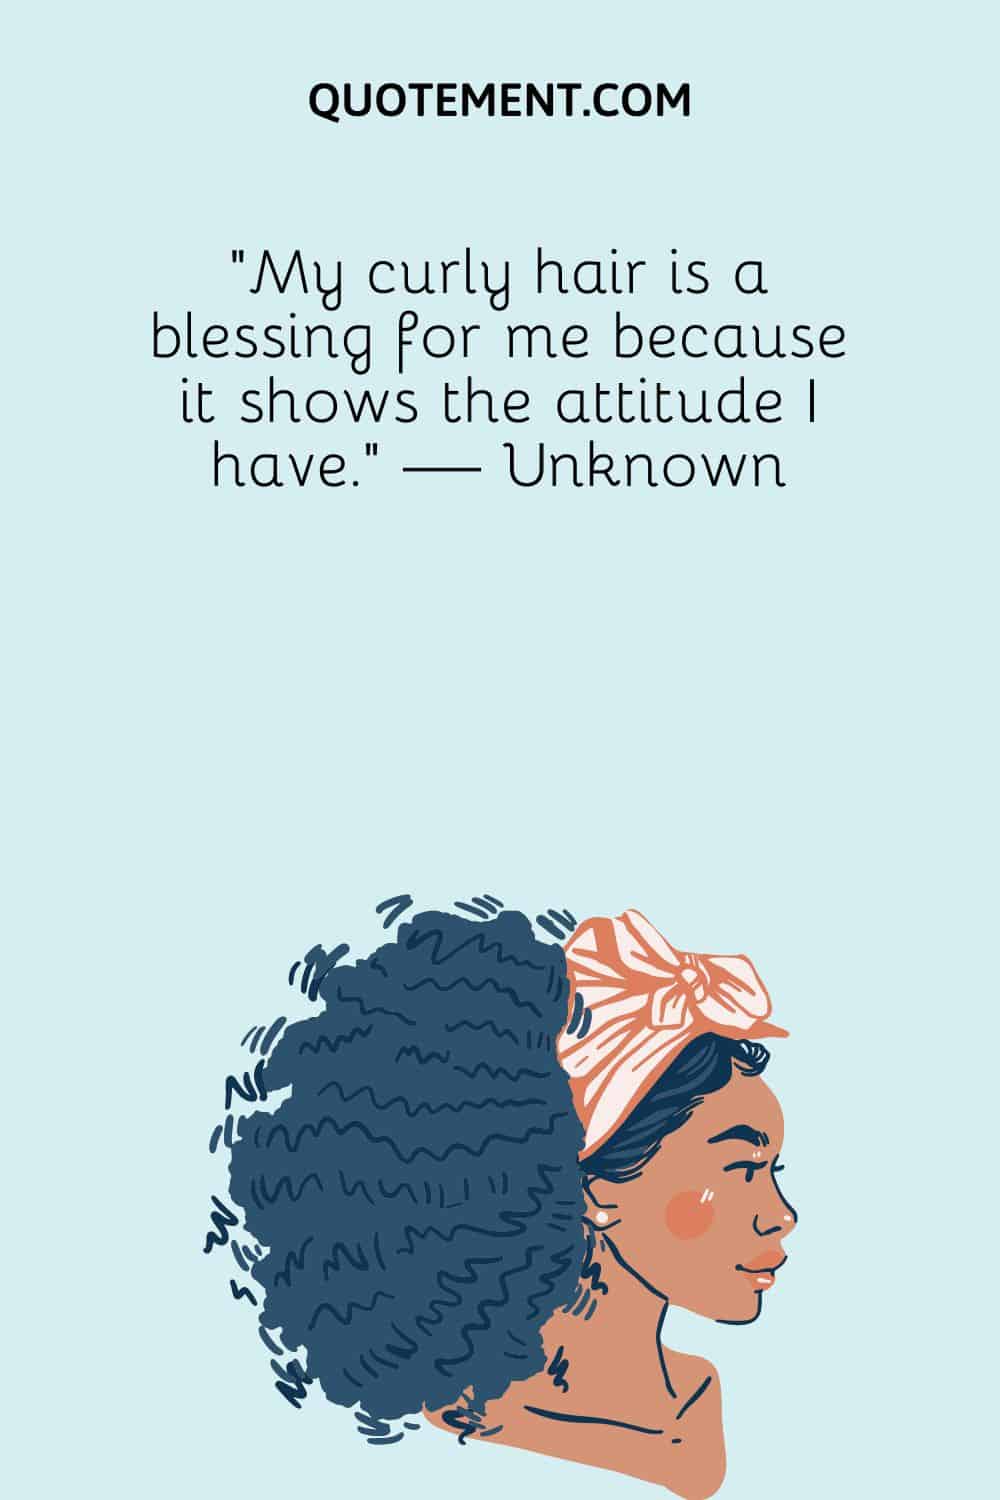 My curly hair is a blessing for me because it shows the attitude I have